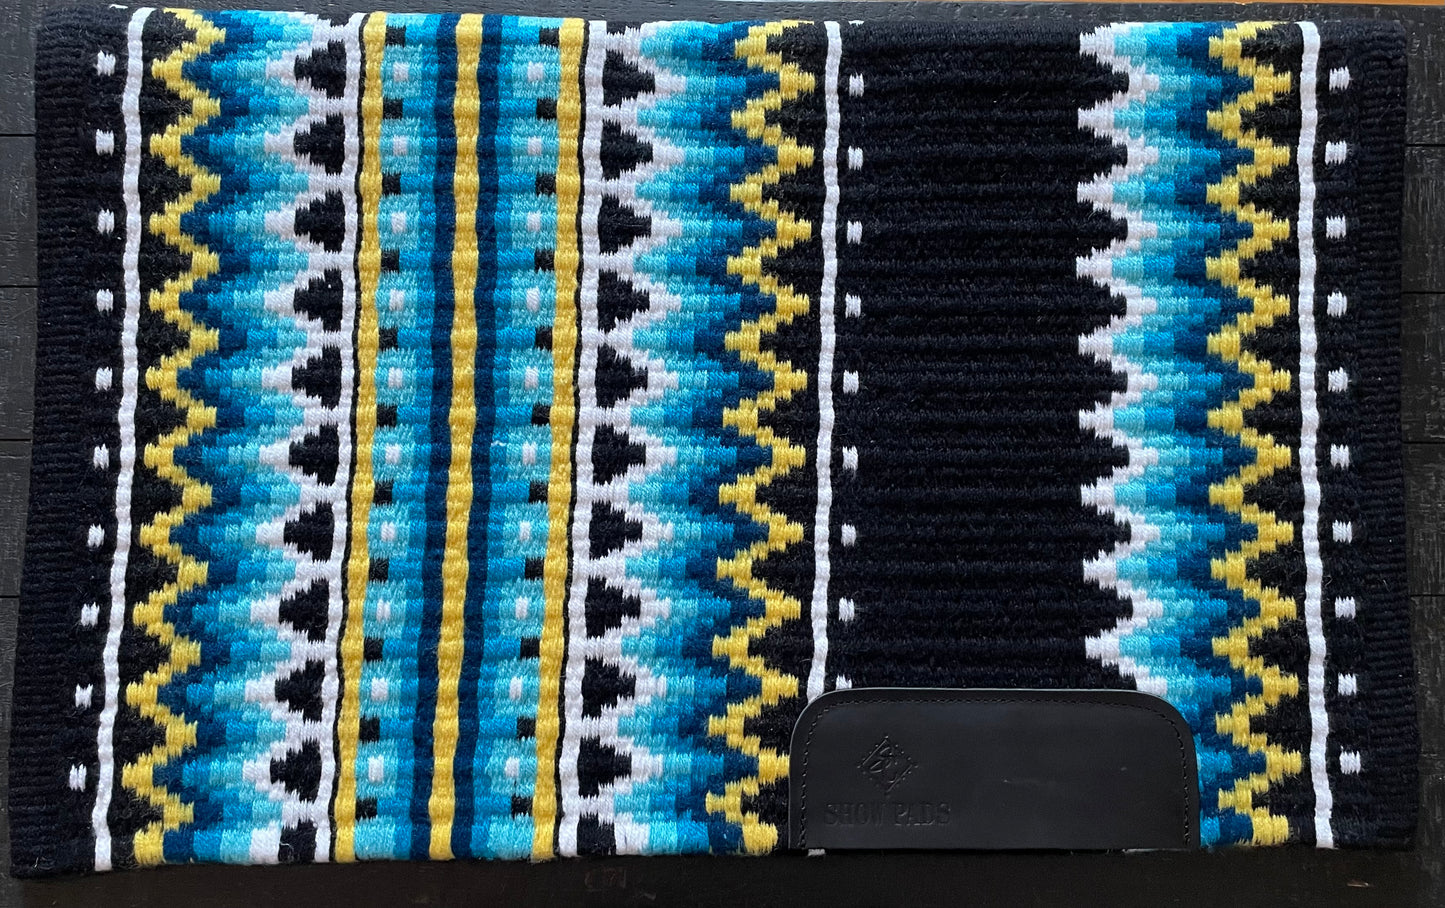 Show Pad 2081 - Black base with Royal, Aqua, Turquoise, Navy, Yellow and White Show Pad